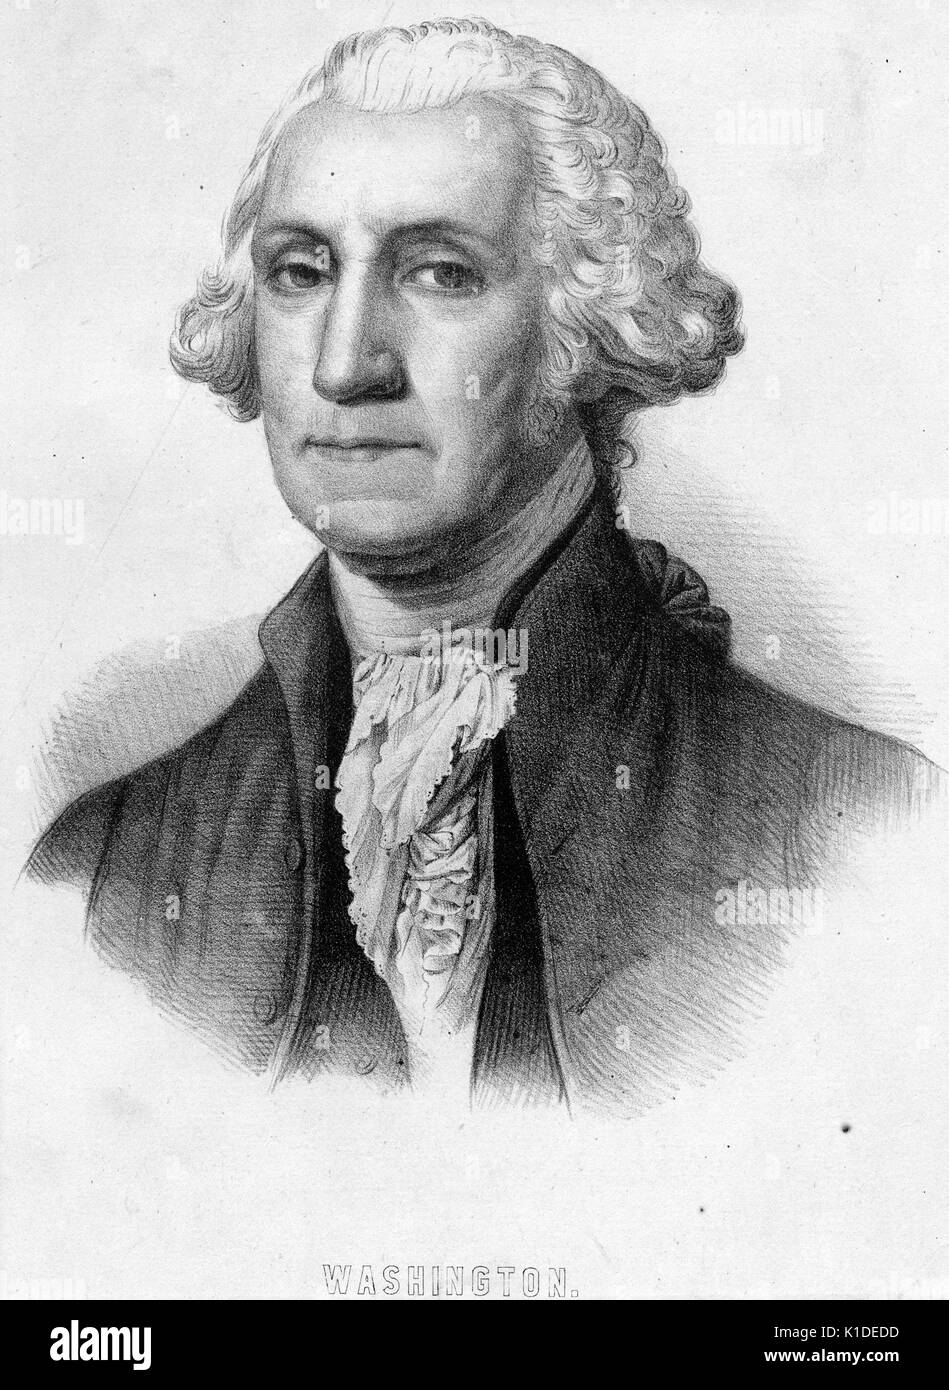 An engraving from a portrait of George Washington, 1800. From the New York Public Library. Stock Photo